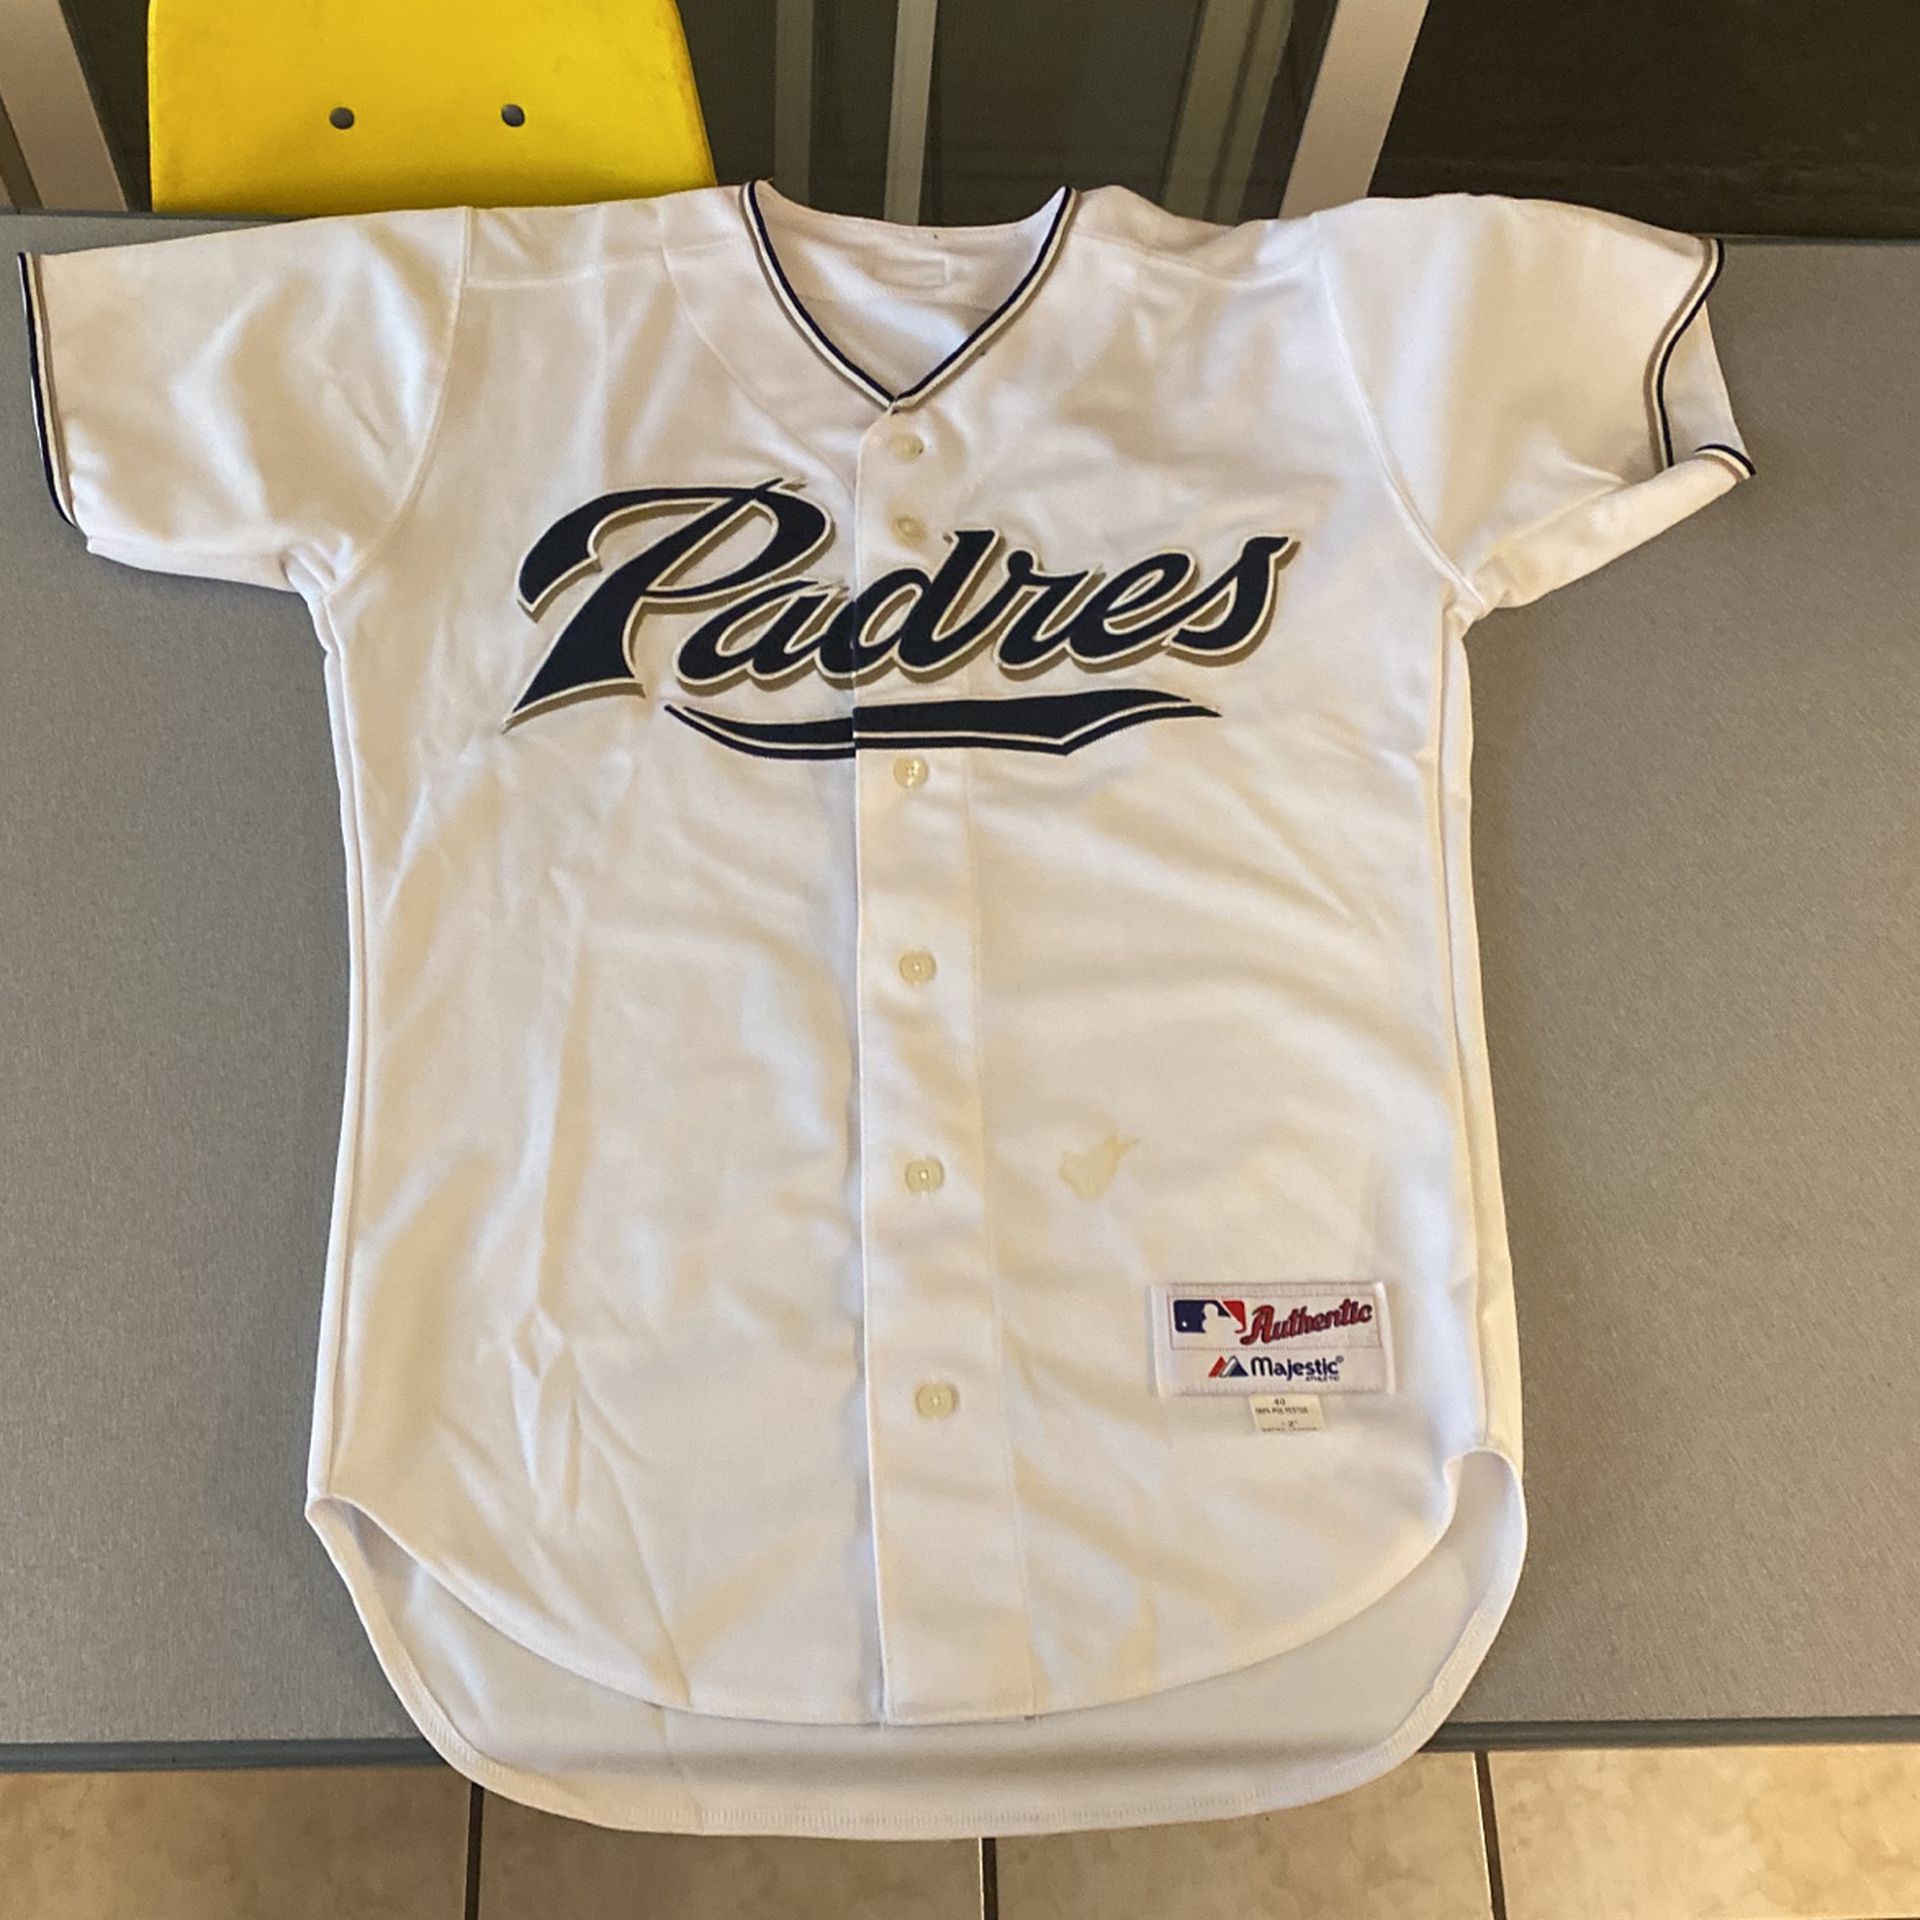 (Authentic) San Diego Padres 2004 jersey for Sale in Chula Vista